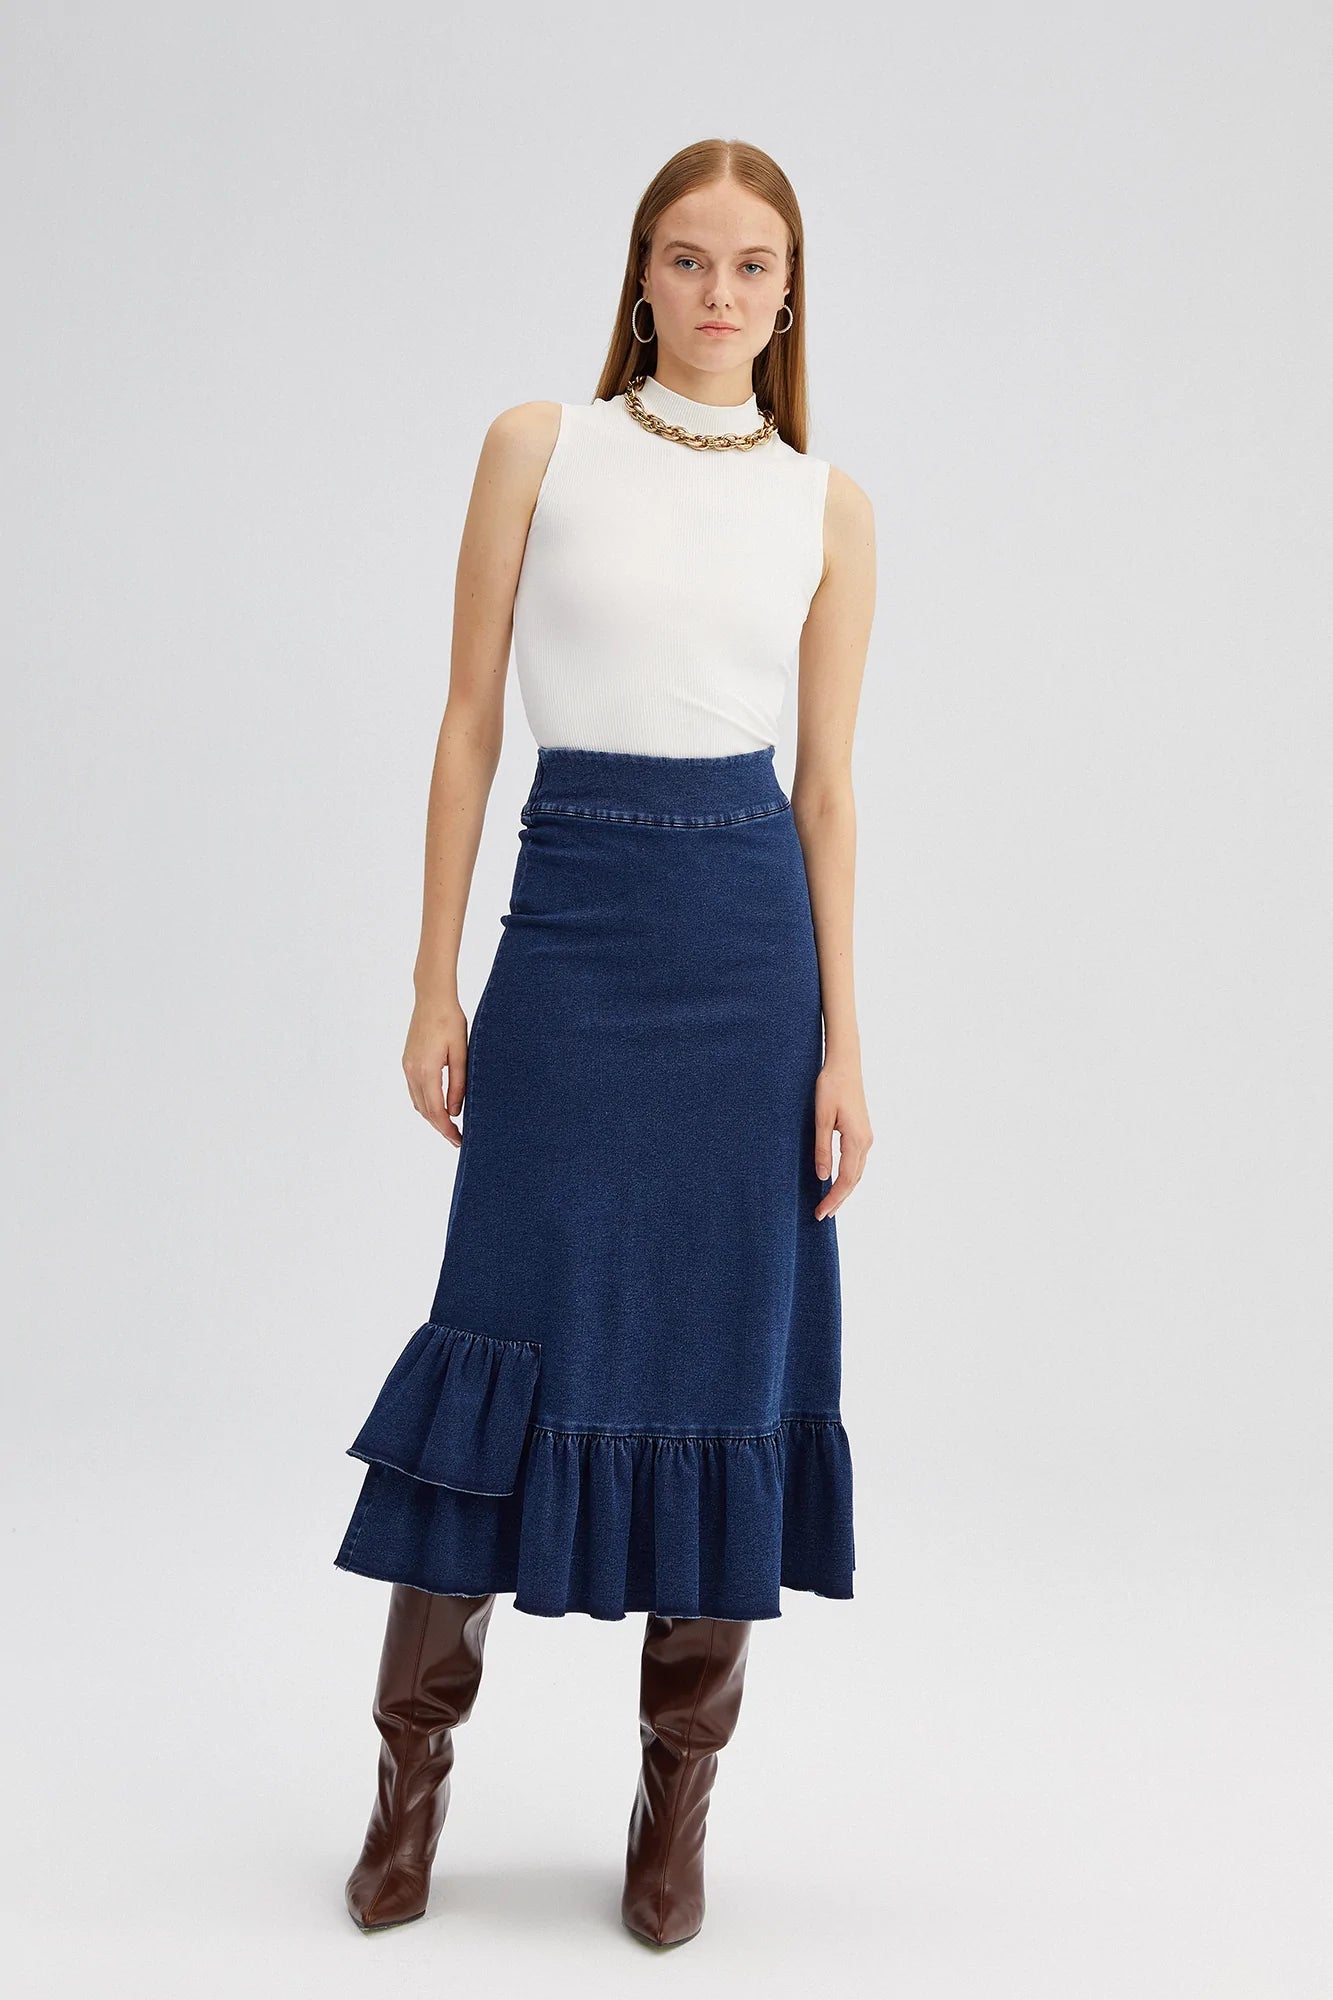 Denim Skirt with Side Details - By Baano